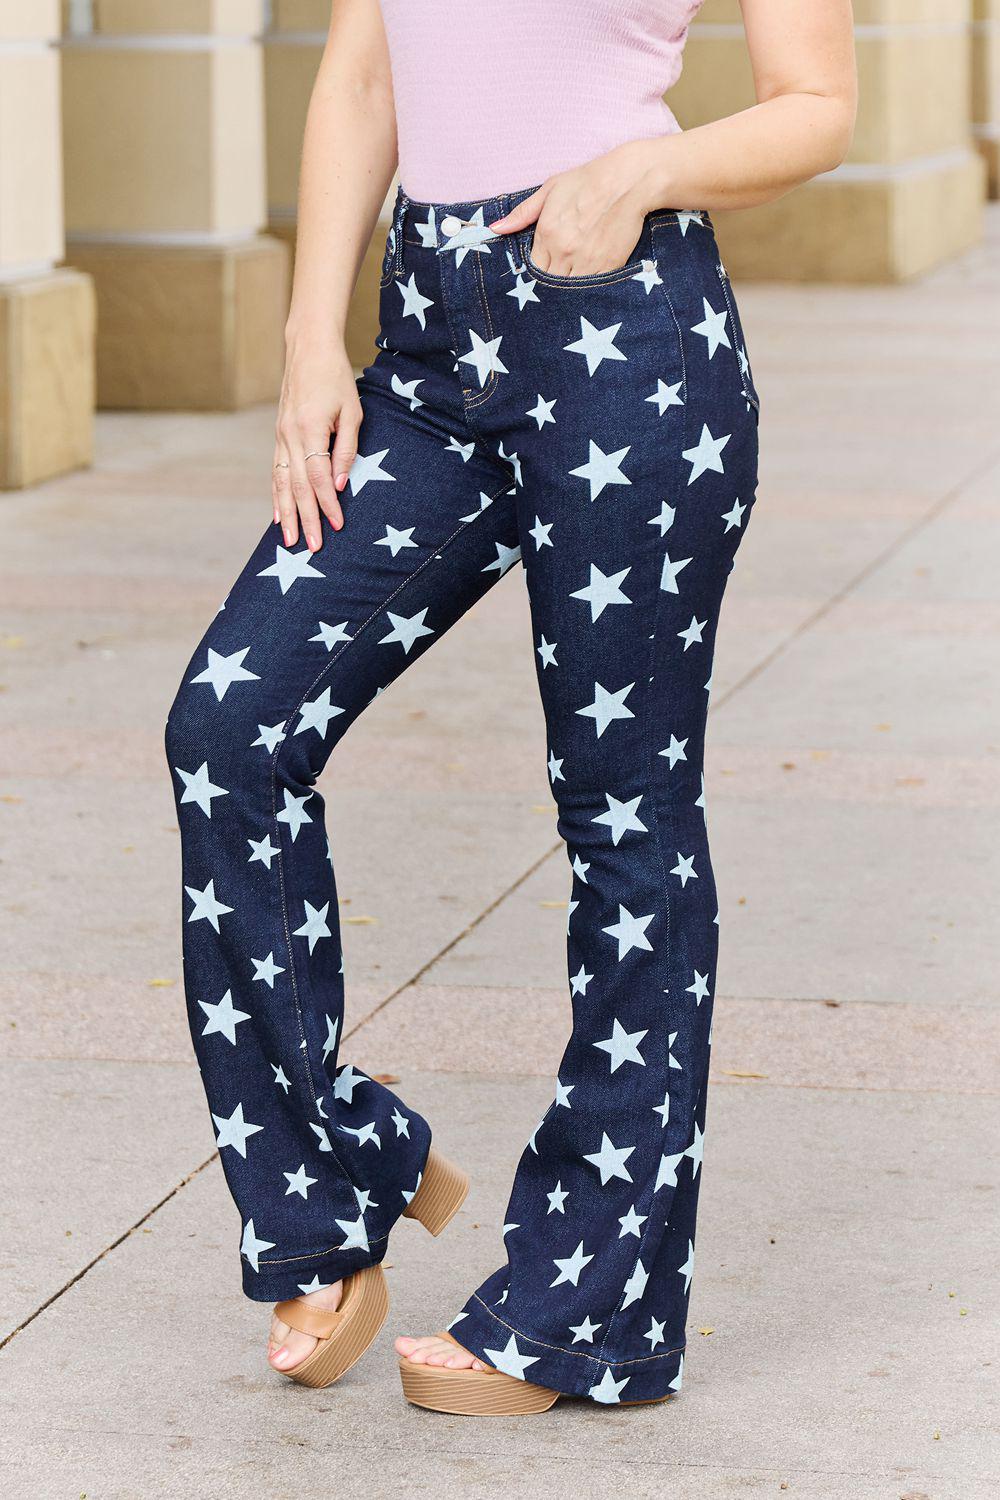 Judy Blue Janelle Full Size High Waist Star Print Flare Jeans BLUE ZONE PLANET